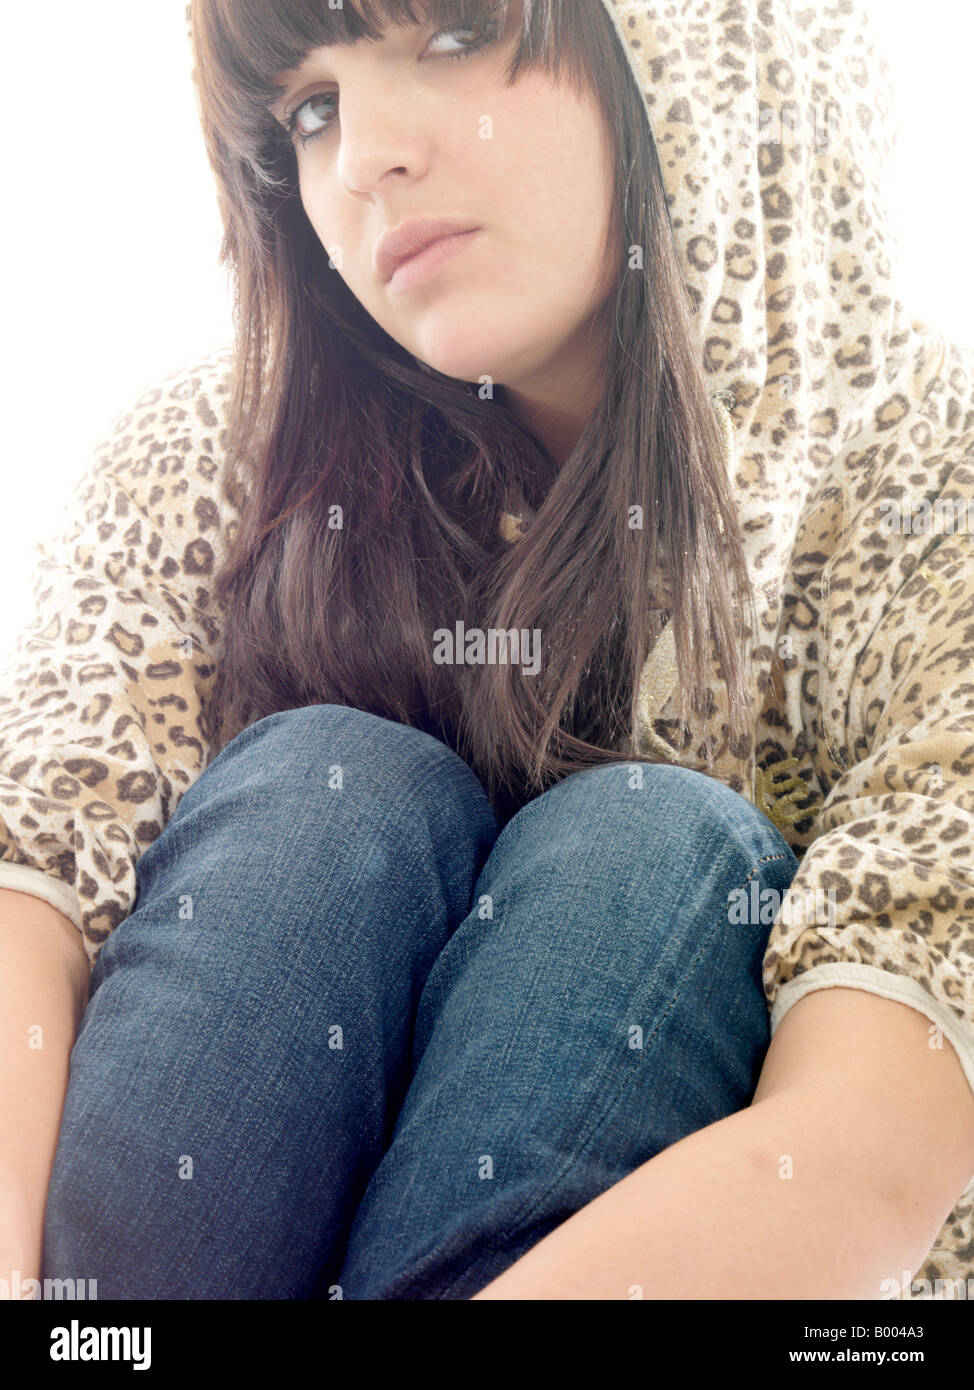 Young Depressed Teenage Girl Or Woman With Negative Thoughts Sitting Alone Needing Help With Mental Health Issues And Depression Stock Photo